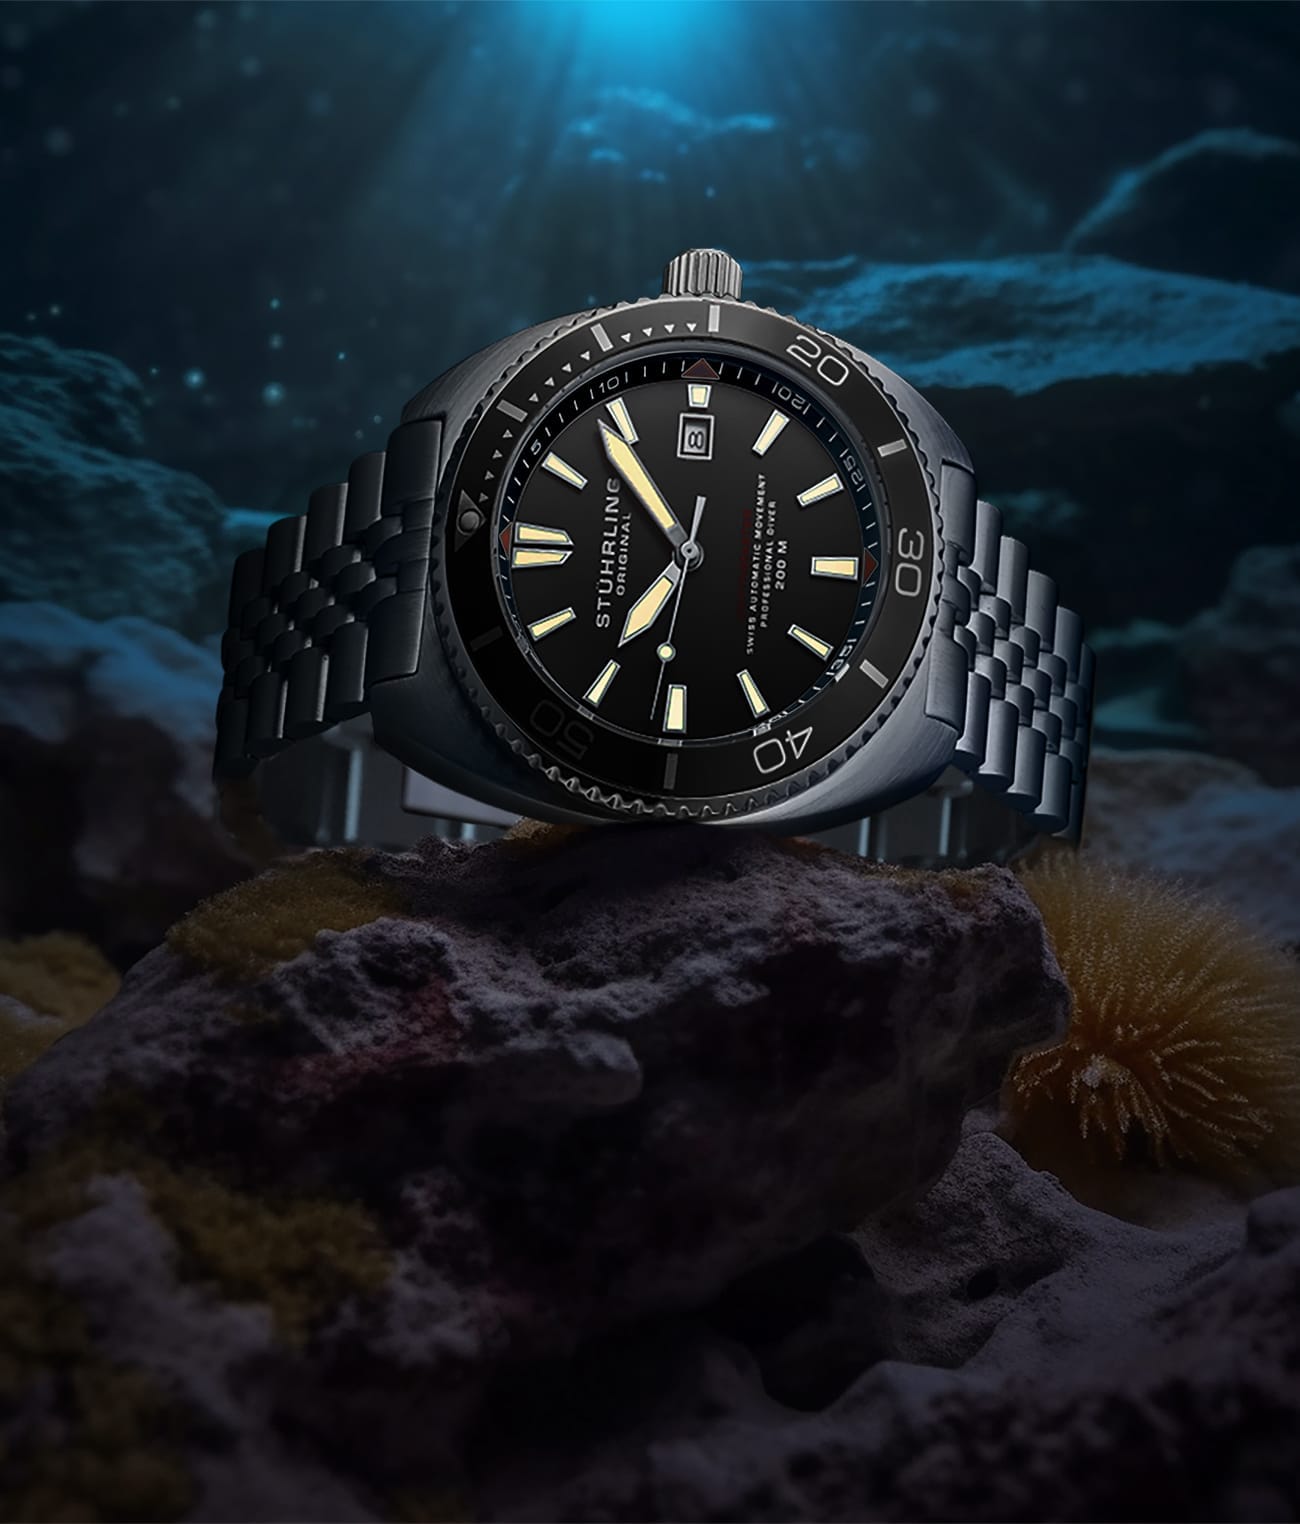 The Swiss Automatic Depthmaster 1008 45mm Diver